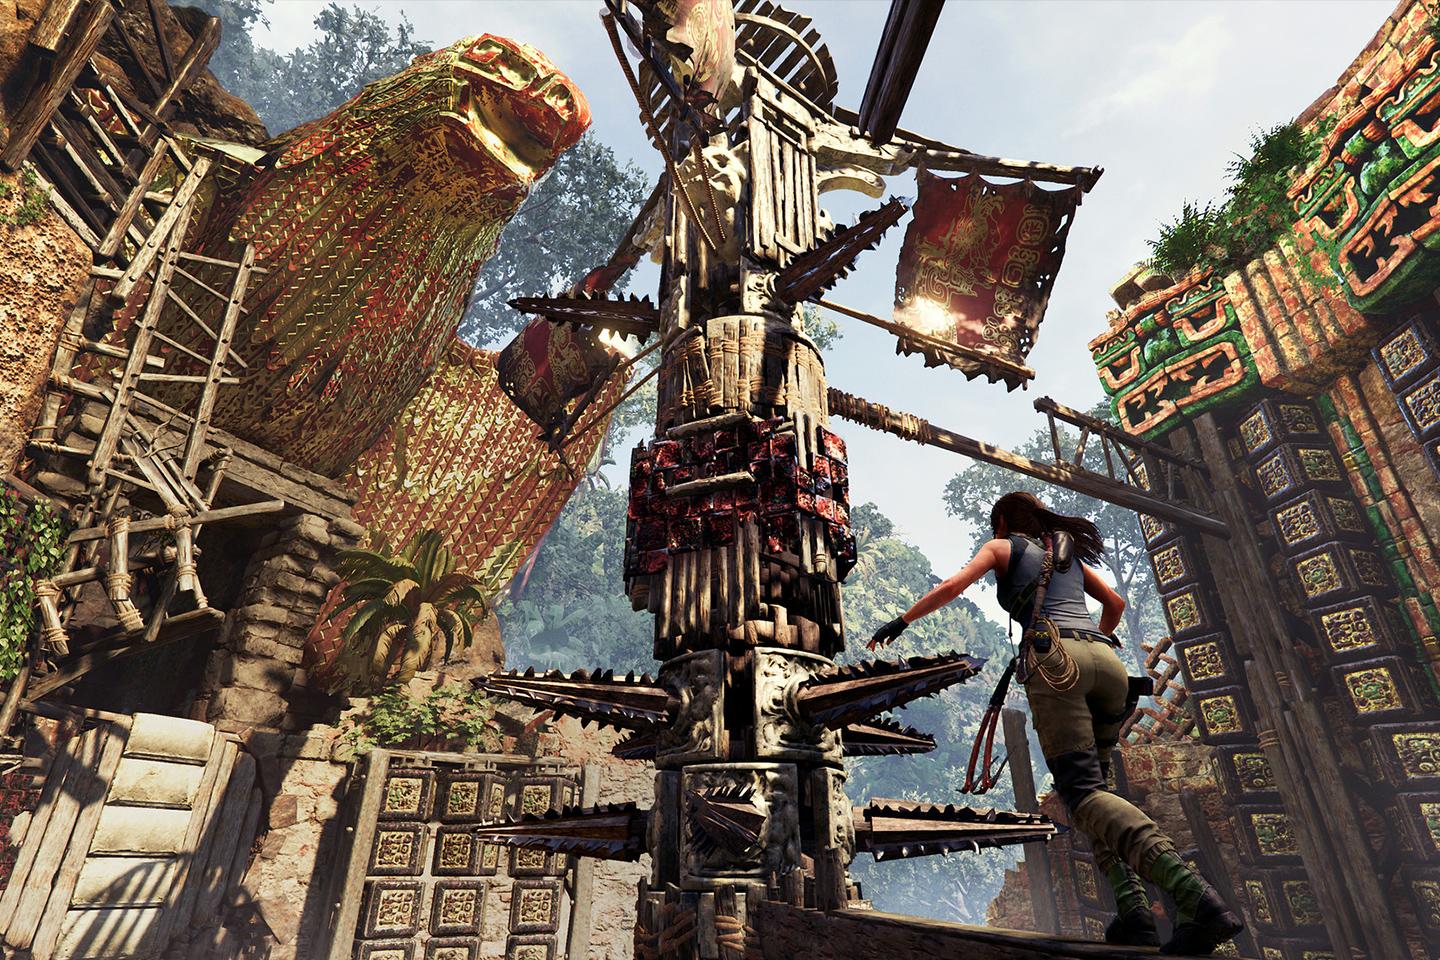 An adventurous screenshot from a Tomb Raider game depicting Lara Croft climbing an intricate wooden structure adorned with colorful tribal decorations in a dense, ruin-filled jungle setting.